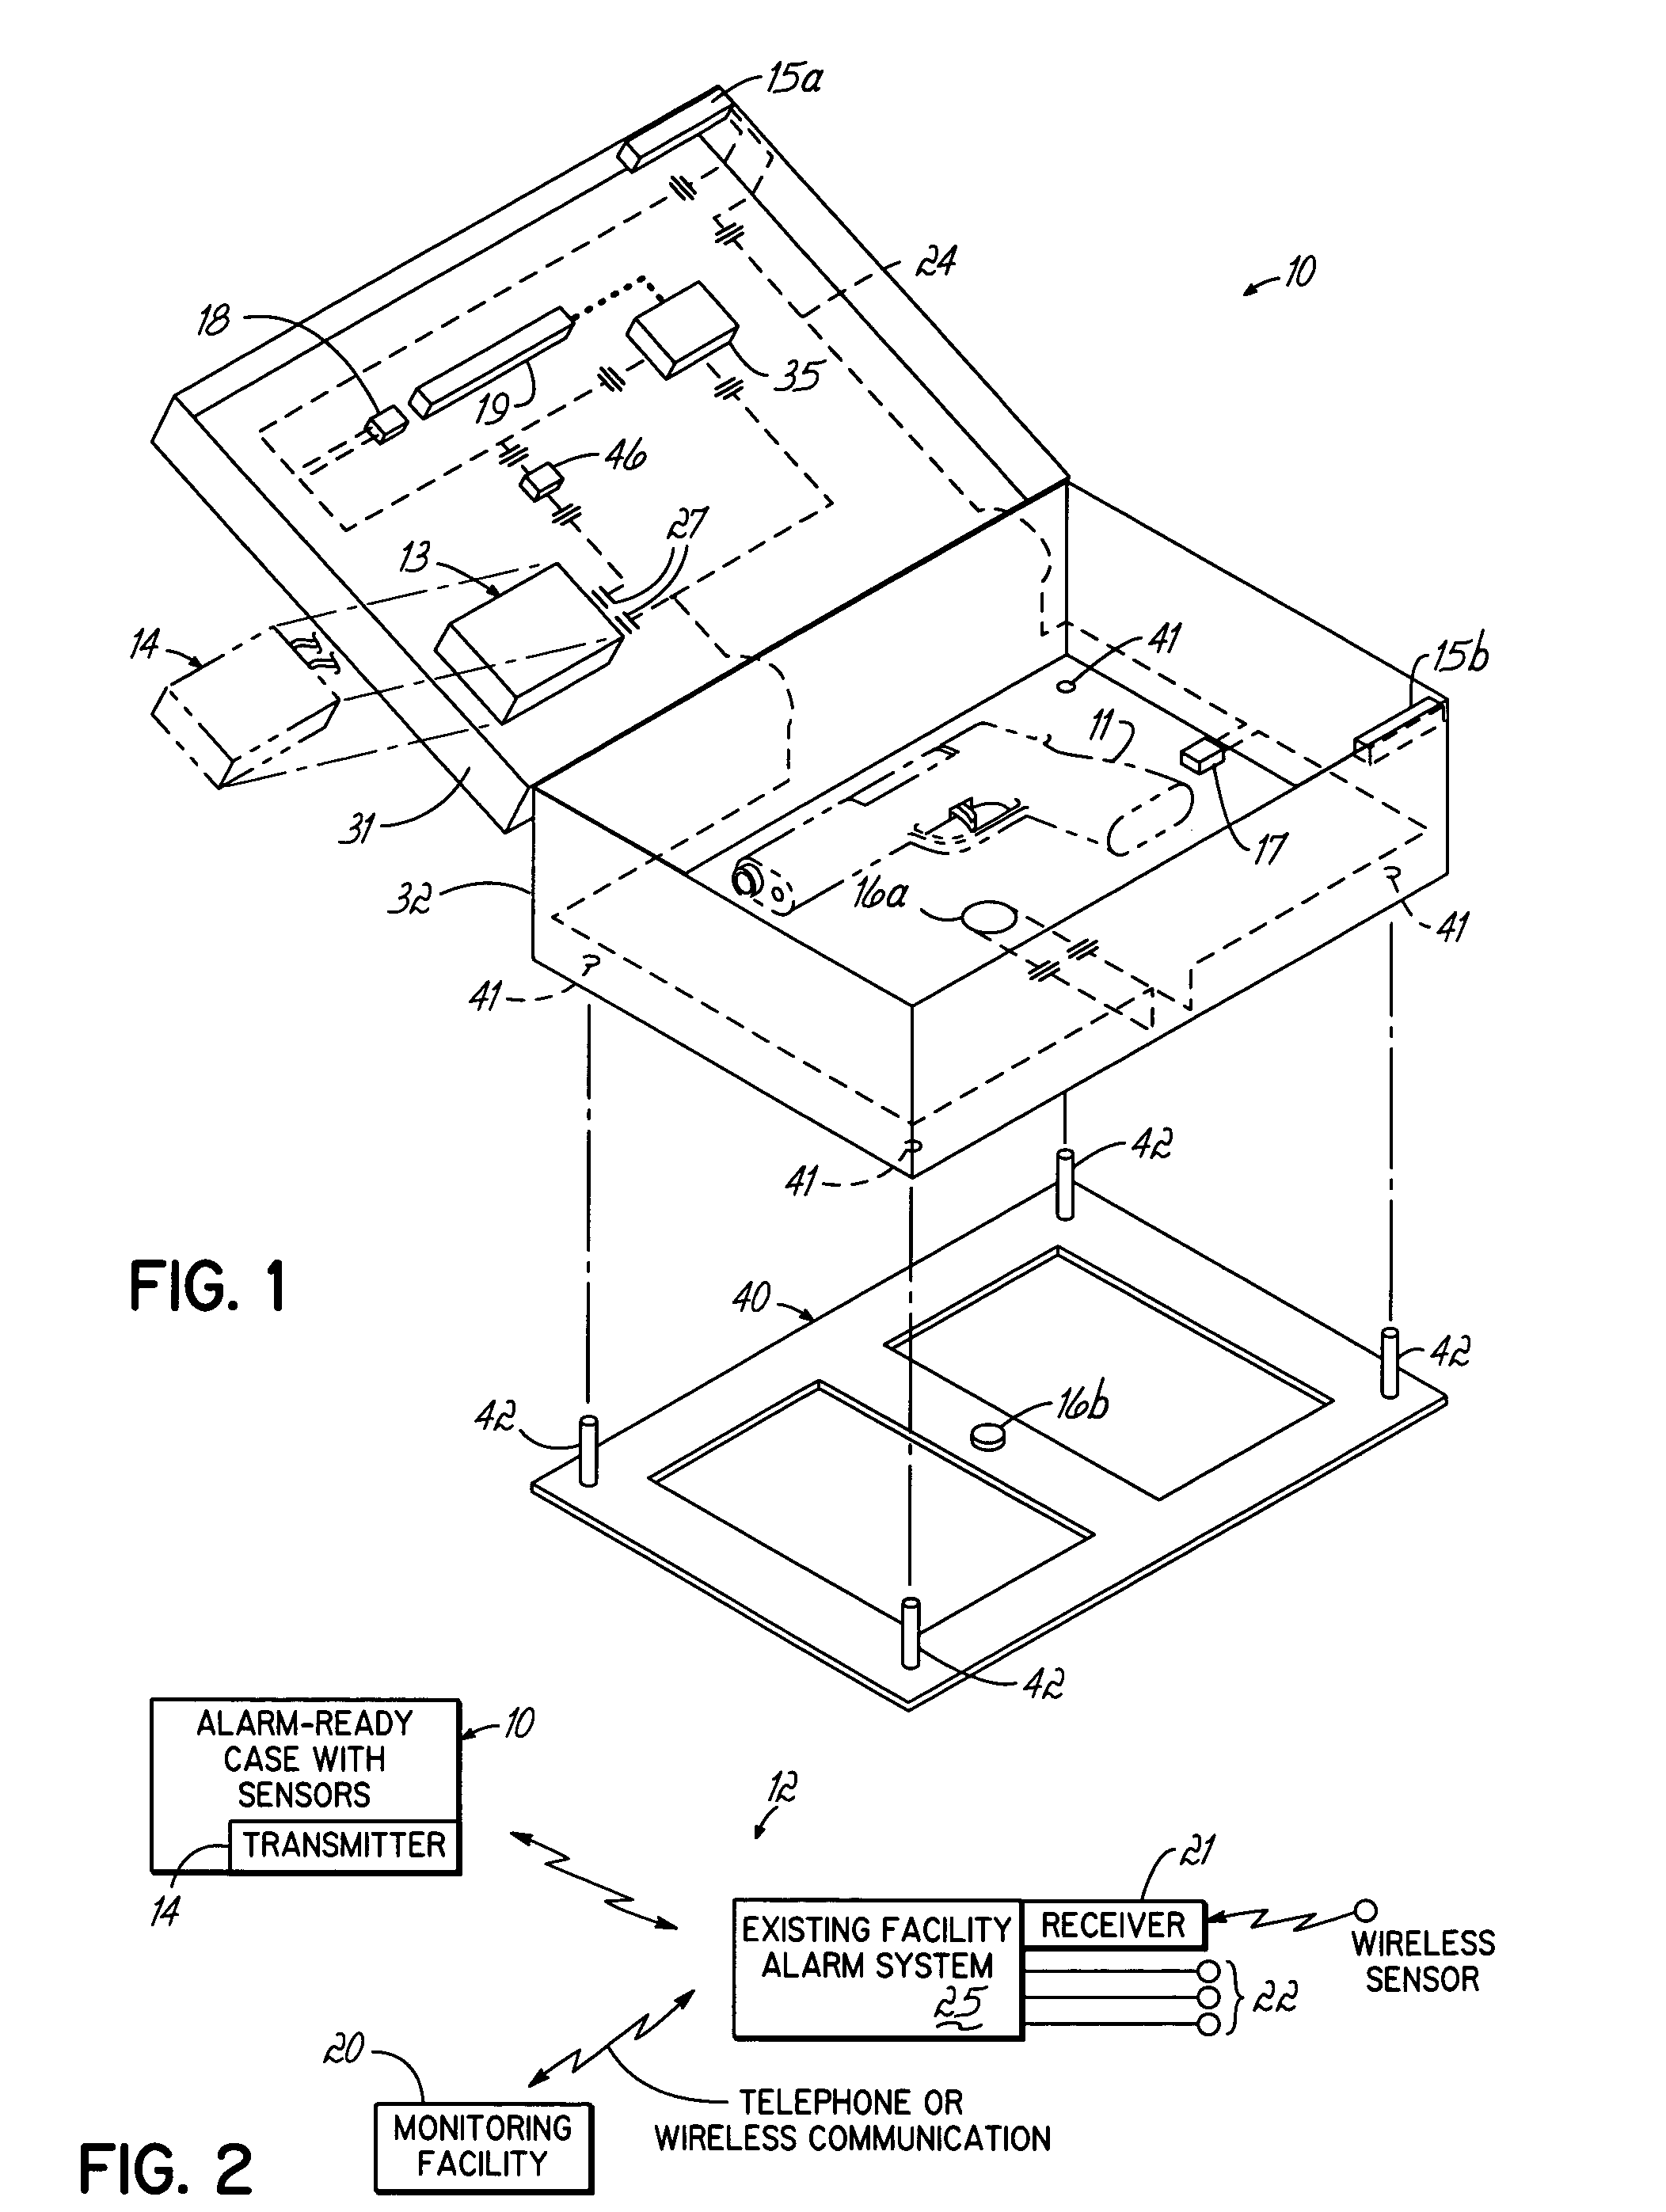 Method and apparatus for securing firearms and other valuables in an alarm protected facility